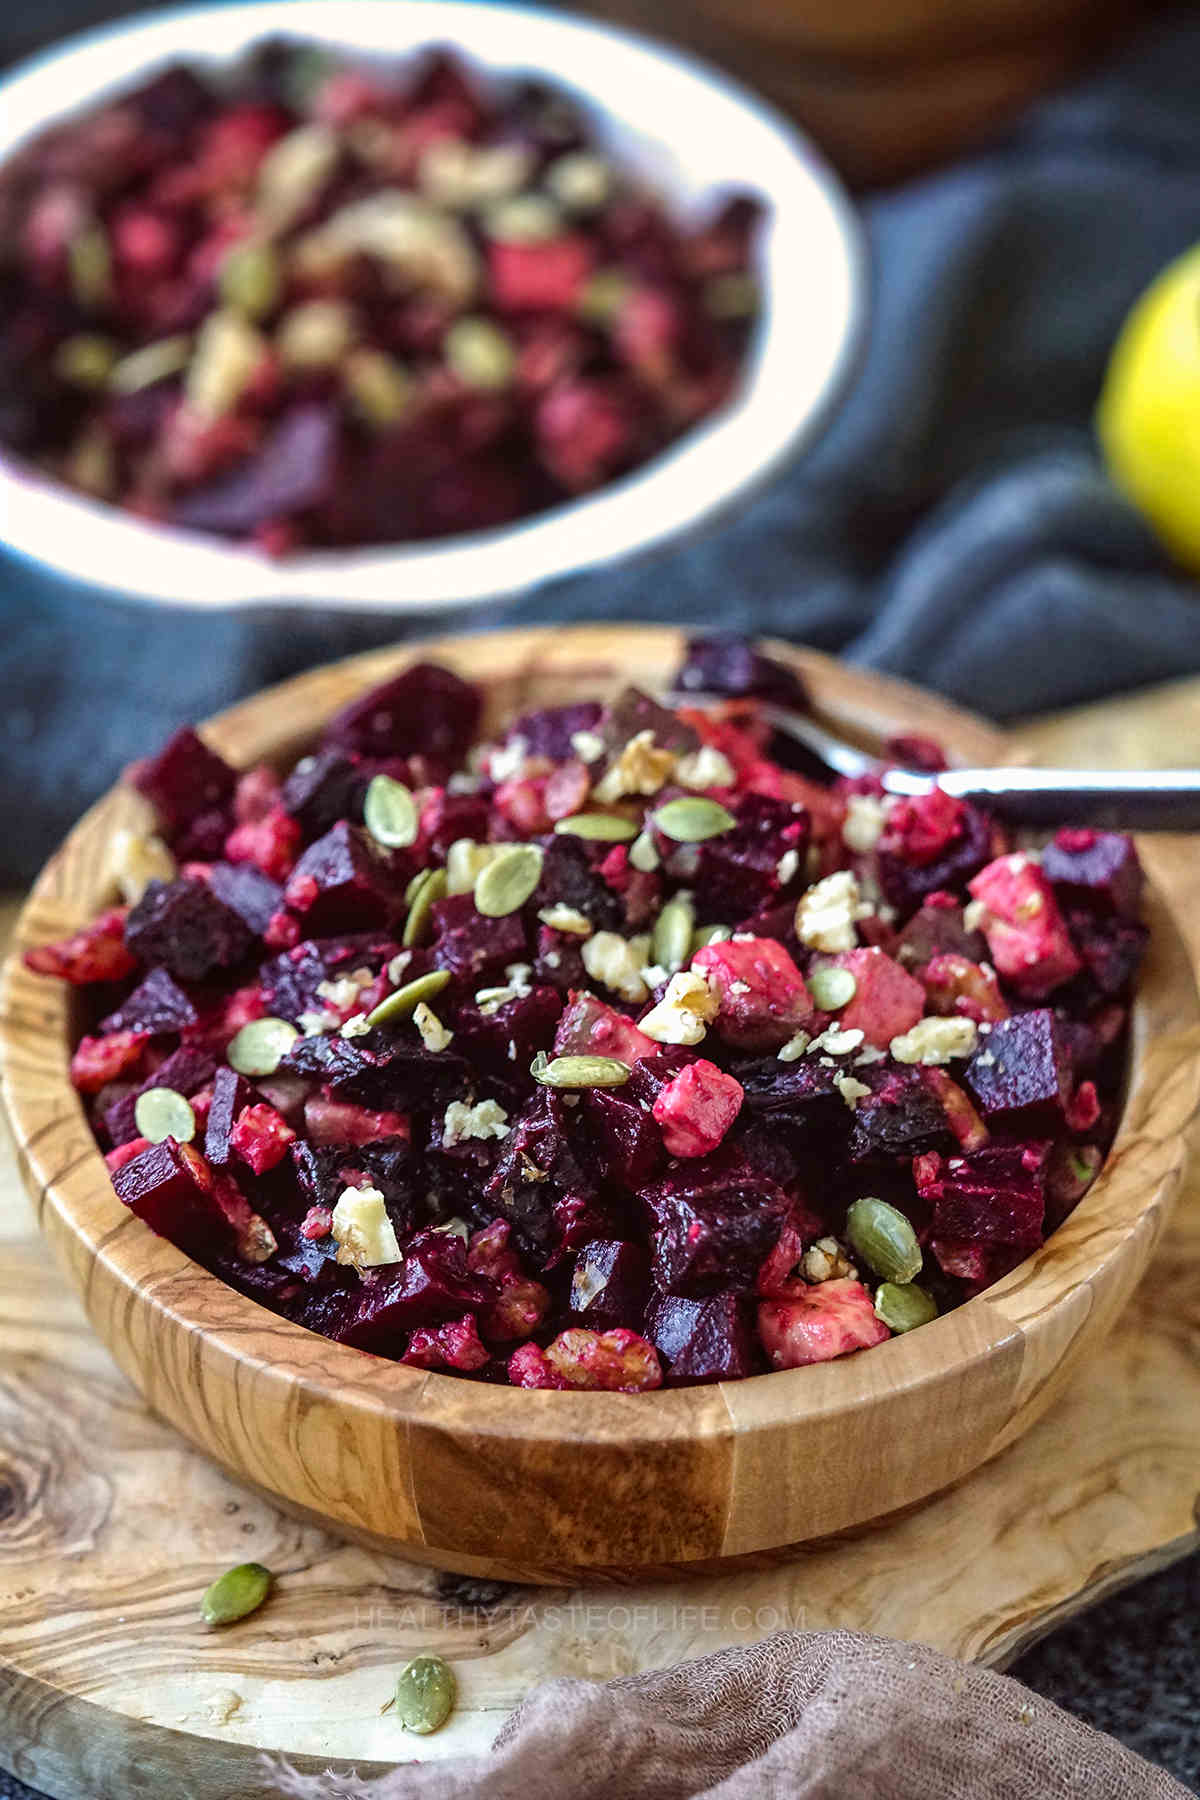 Vegan salad with beetroot, walnuts, prunes and avocado garnished with pumpkin seeds.